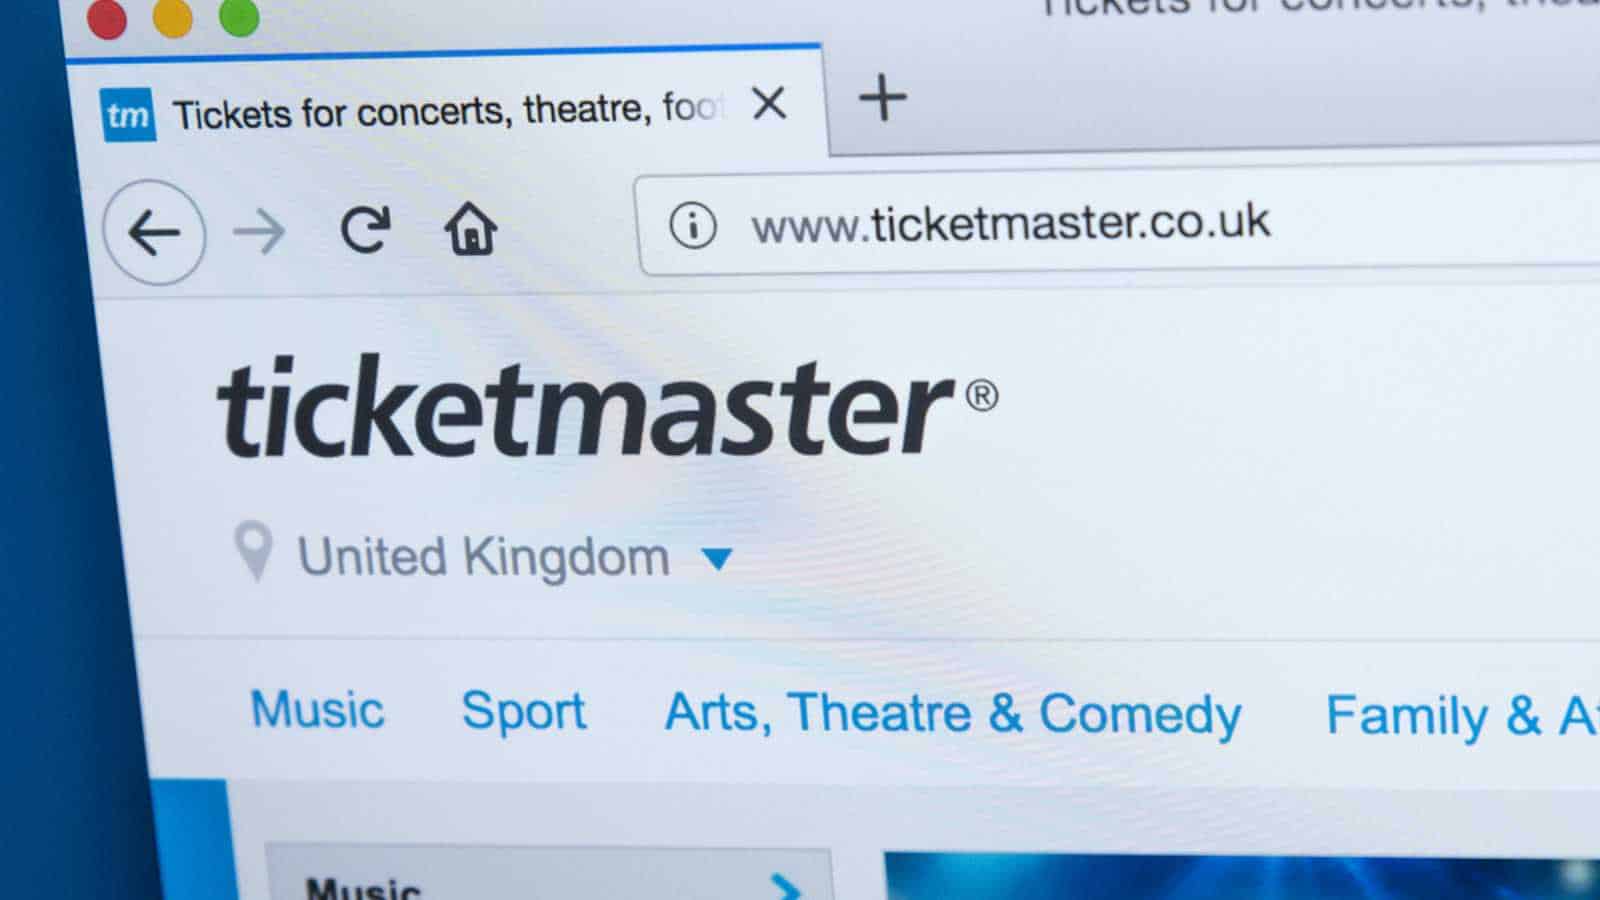 LONDON, UK - JANUARY 8TH 2018: The homepage of the official website for Ticketmaster - the American ticket sales and distribution company, on 8th January 2018.